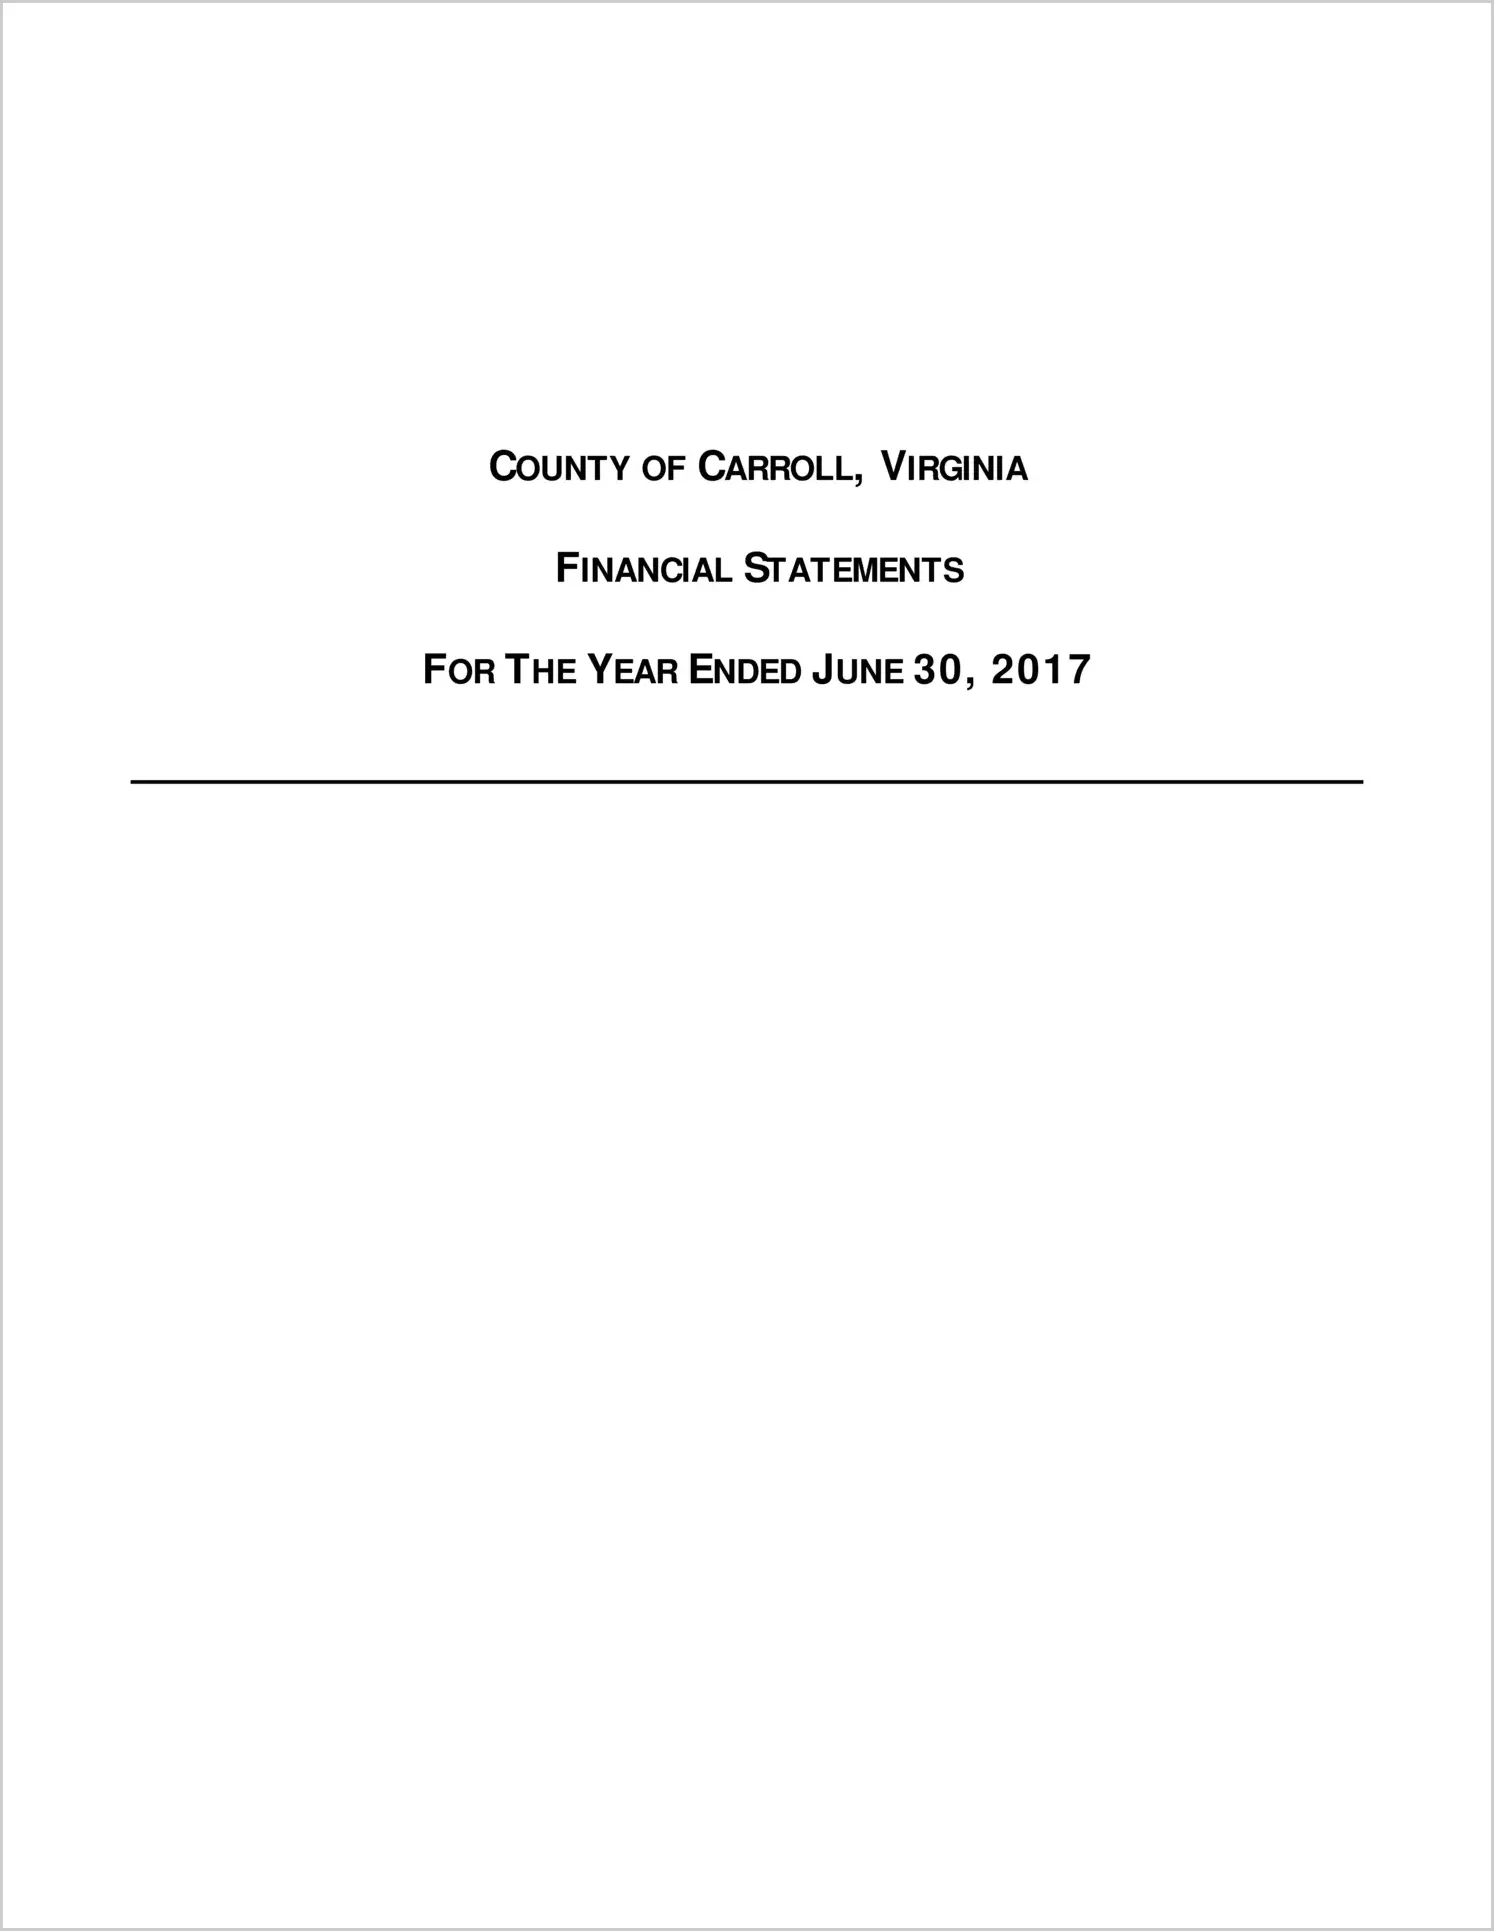 2017 Annual Financial Report for County of Carroll